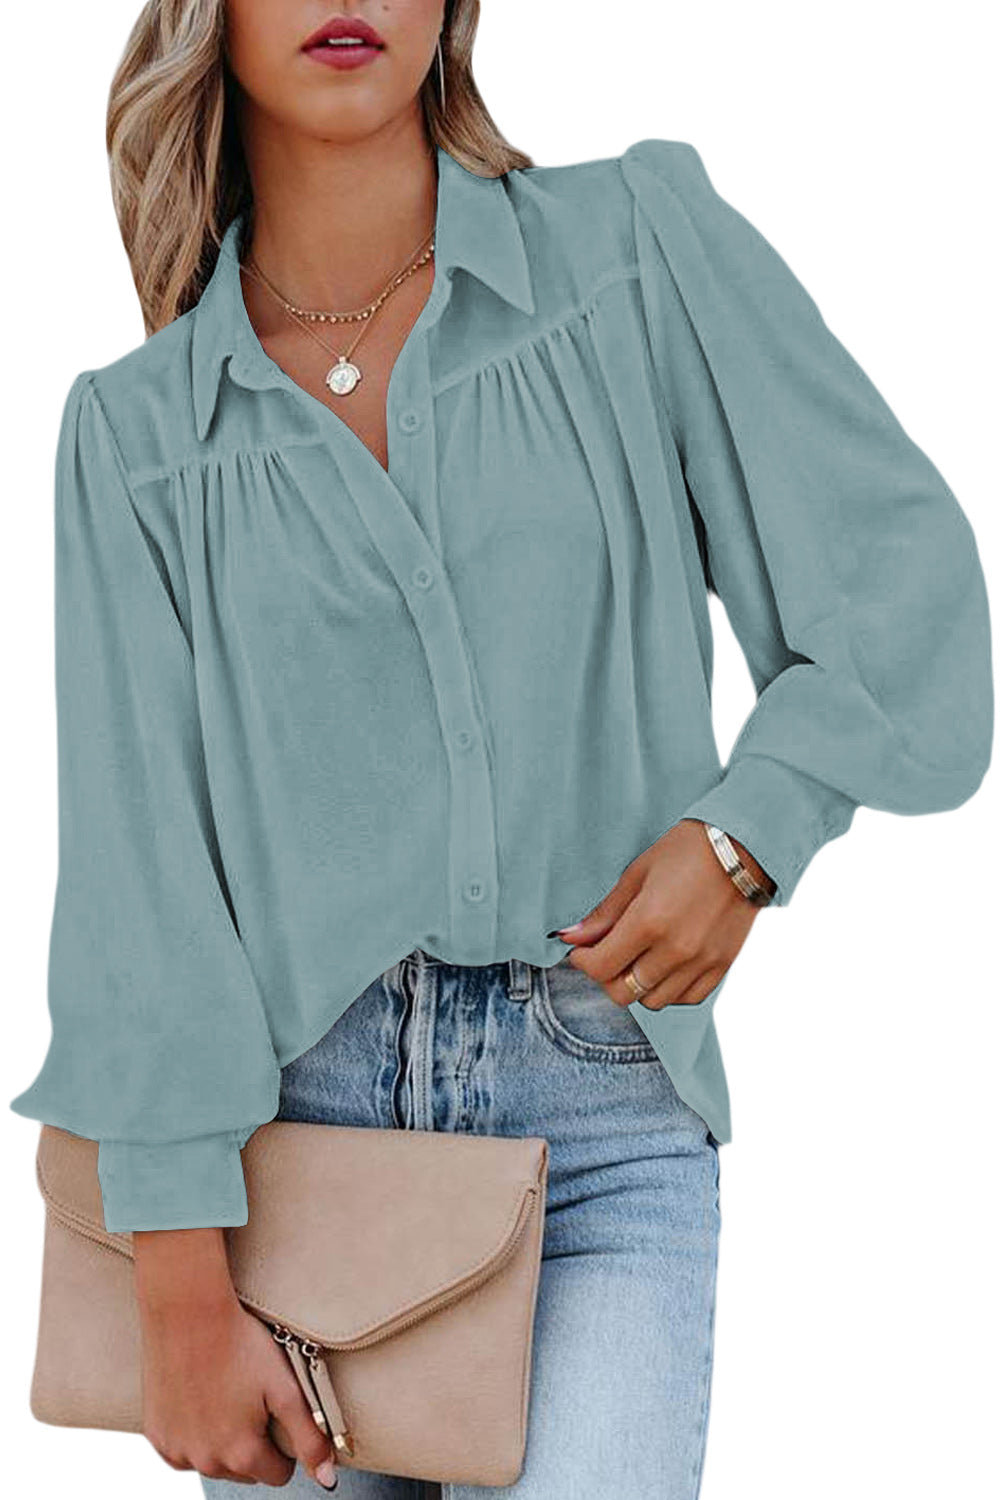 LC2552187-4-S, LC2552187-4-M, LC2552187-4-L, LC2552187-4-XL, LC2552187-4-2XL, Sky Blue Solid Color Button Up Puff Sleeve Blouse